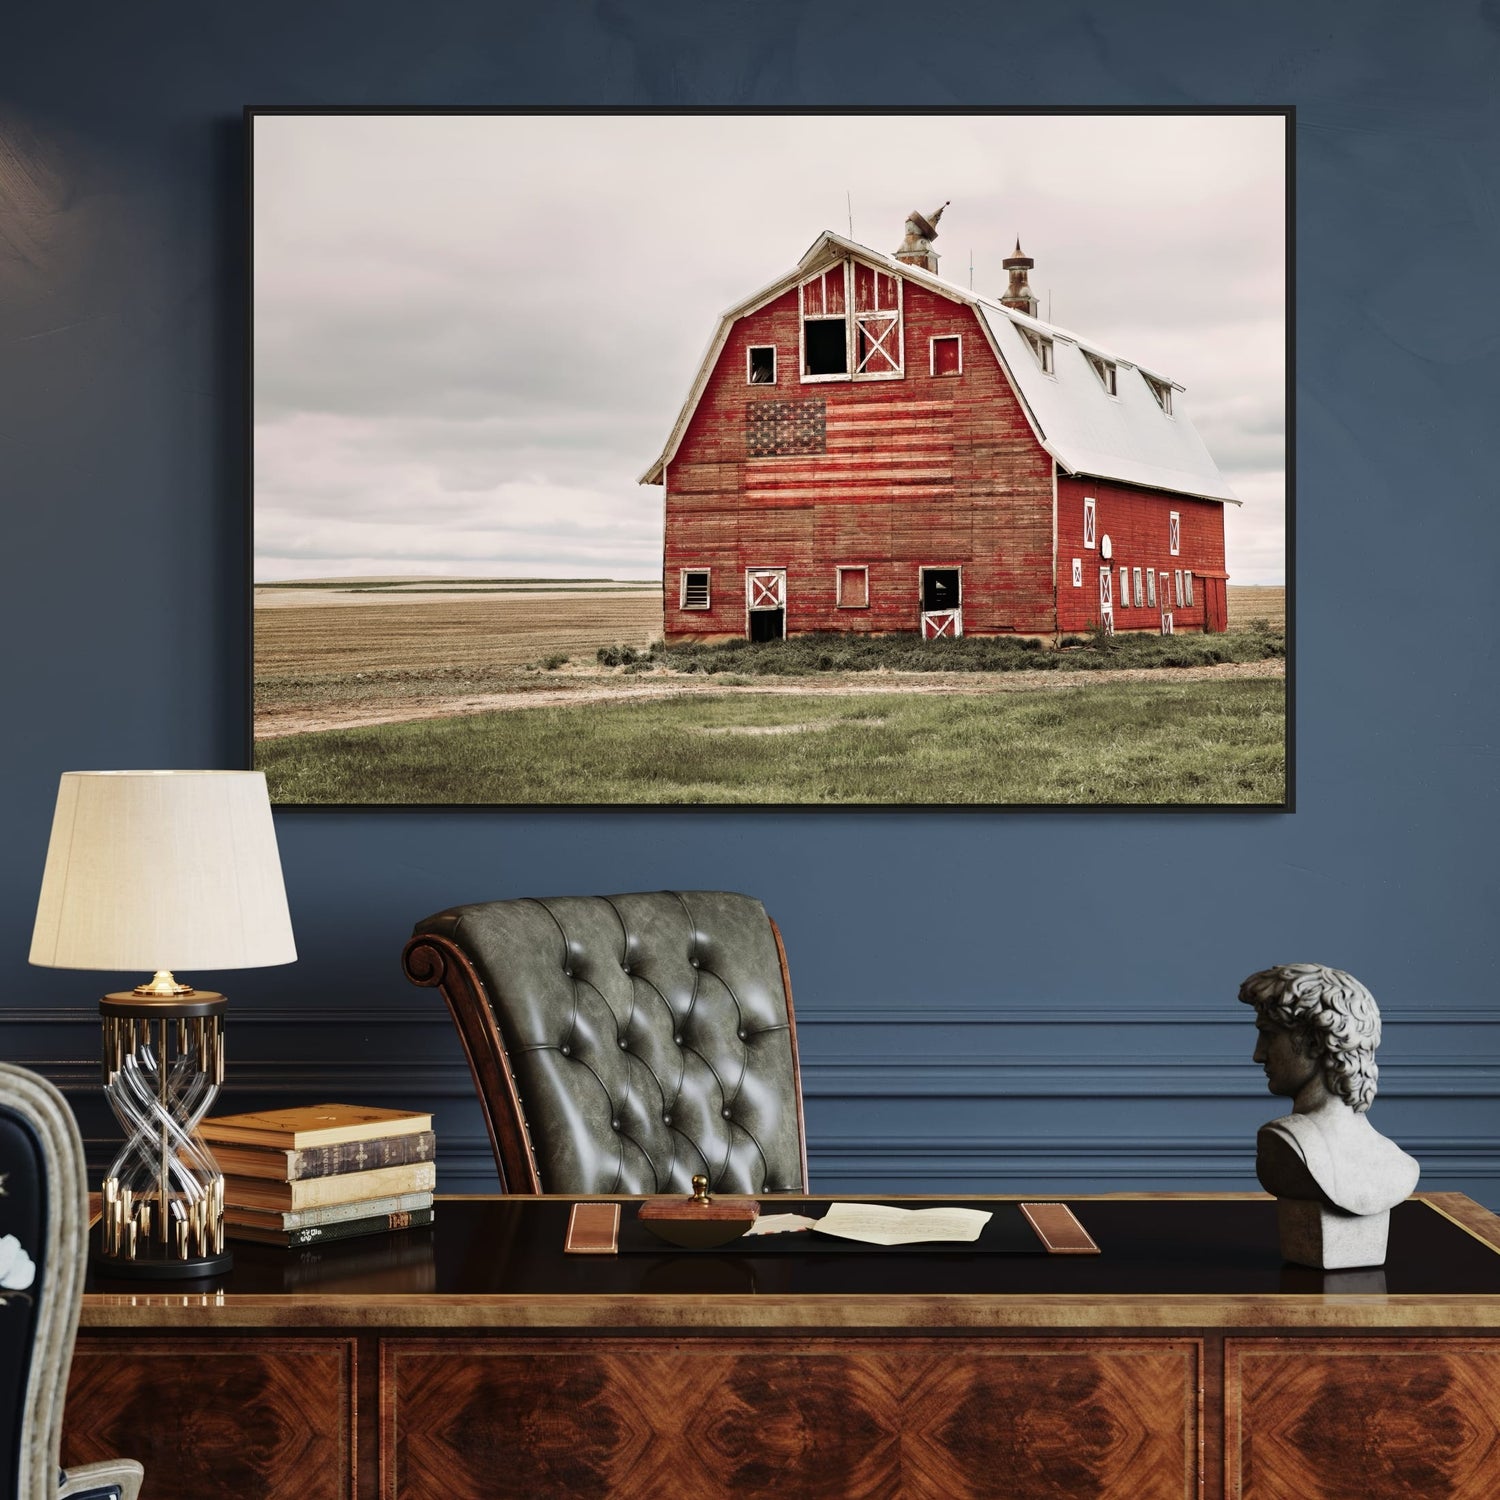 Old red barn with the American flag painted on it.  Shown as a large canvas print.